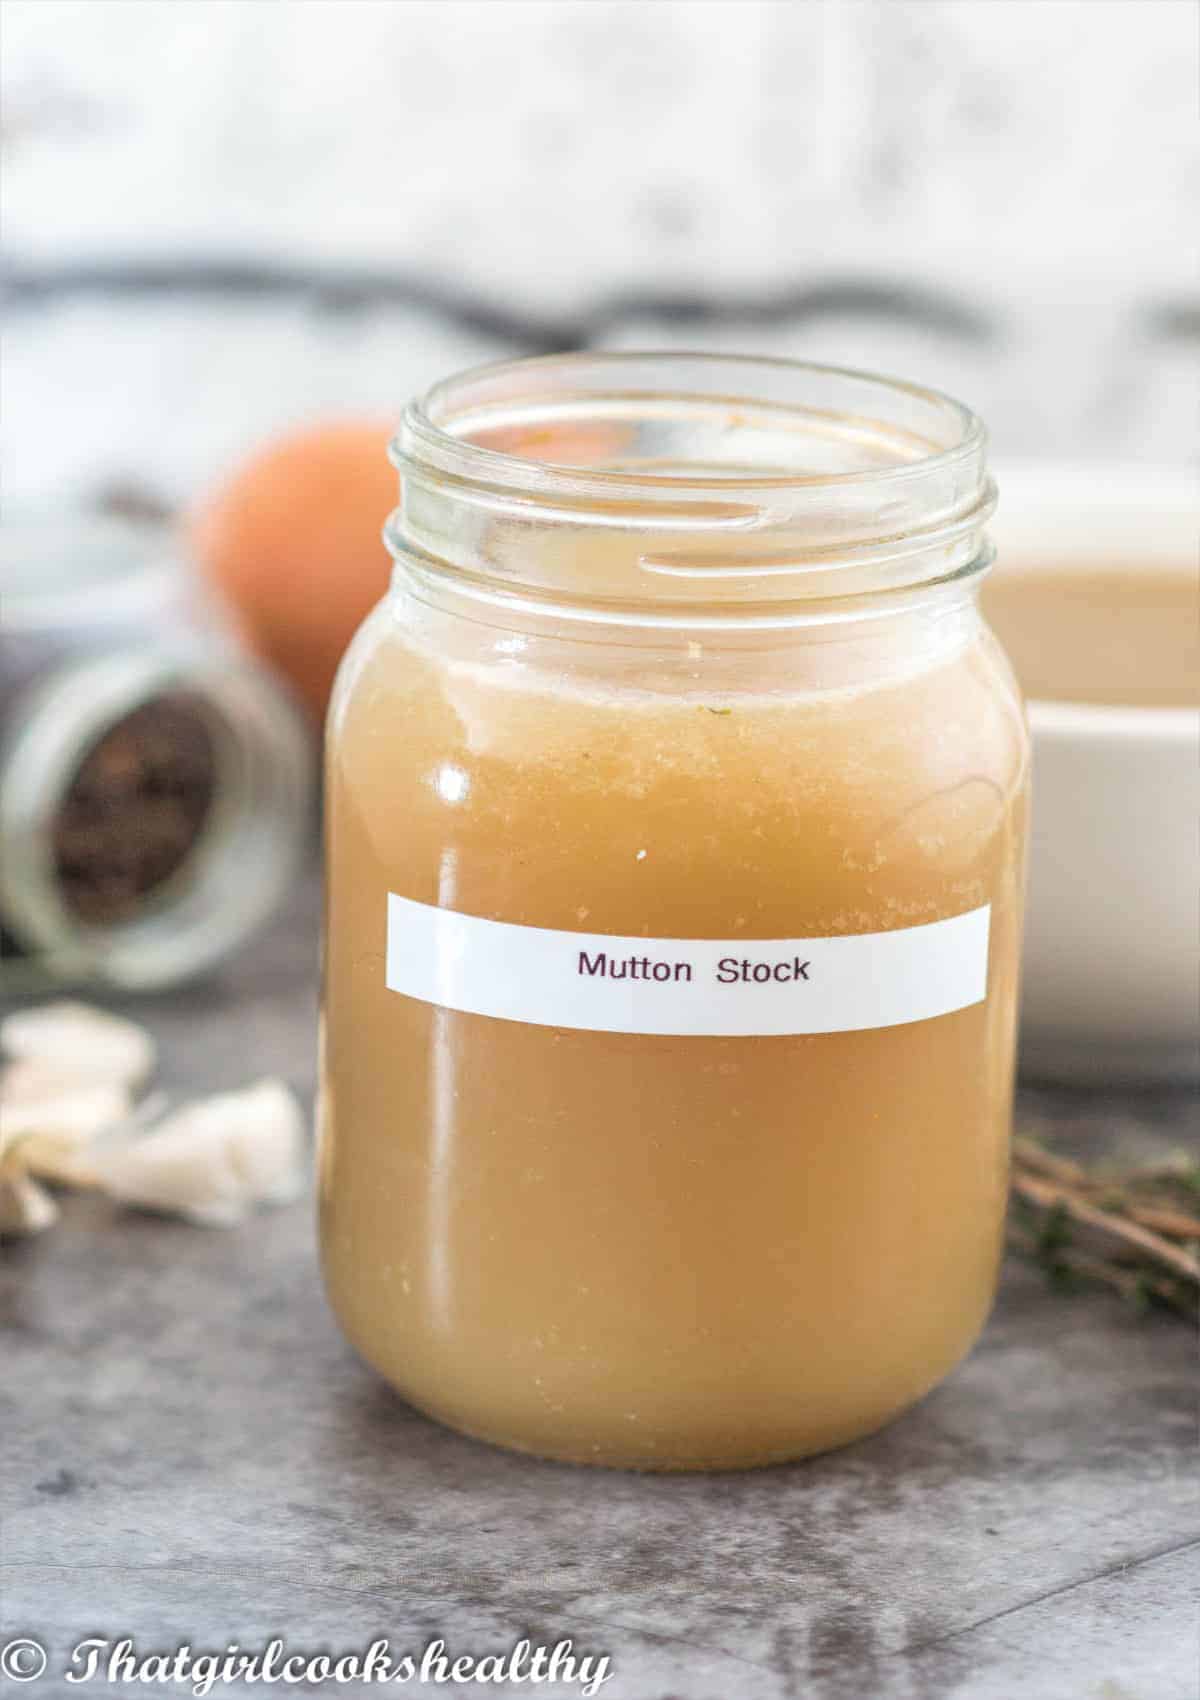 stock in a glass jar